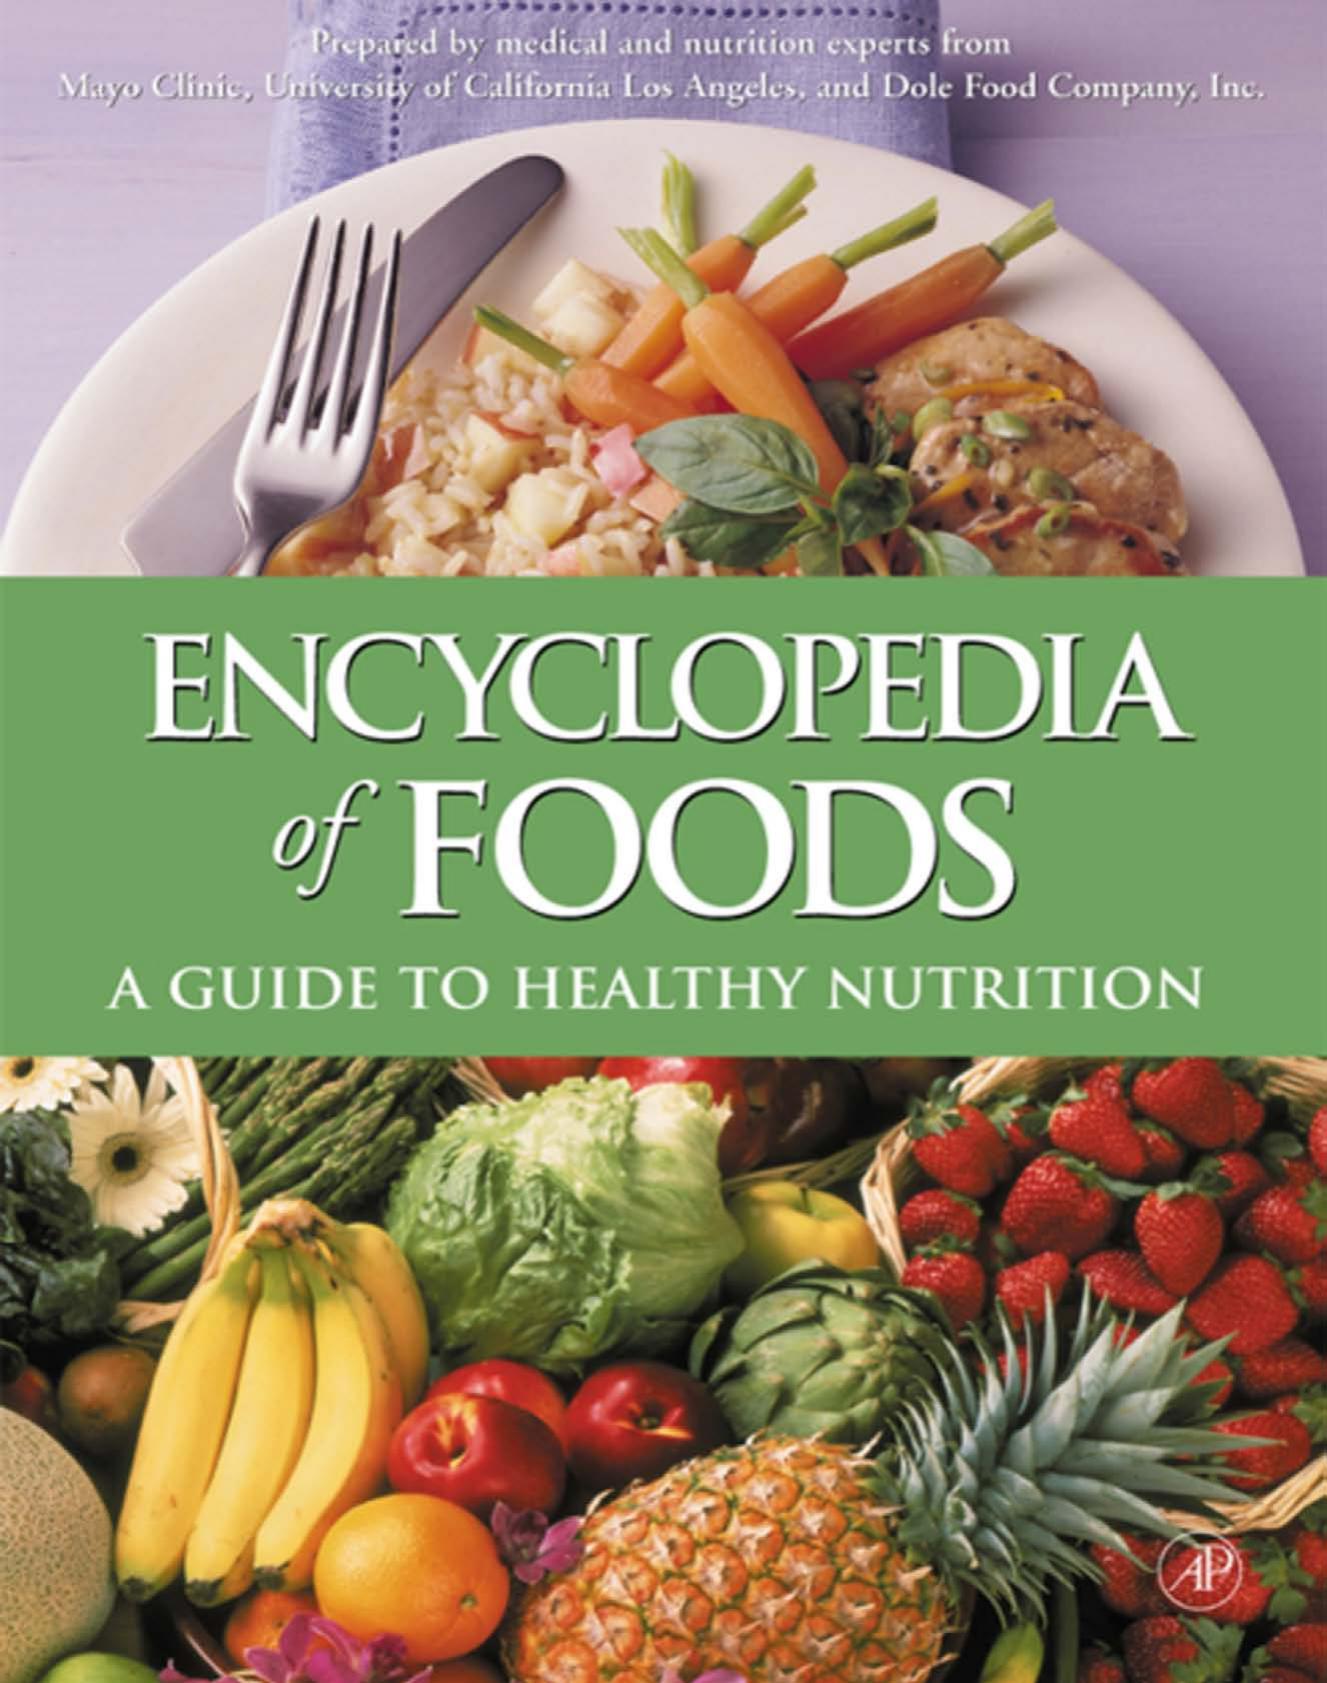 Encyclopedia of Foods. A Guide to Healthy Nutrition 2002